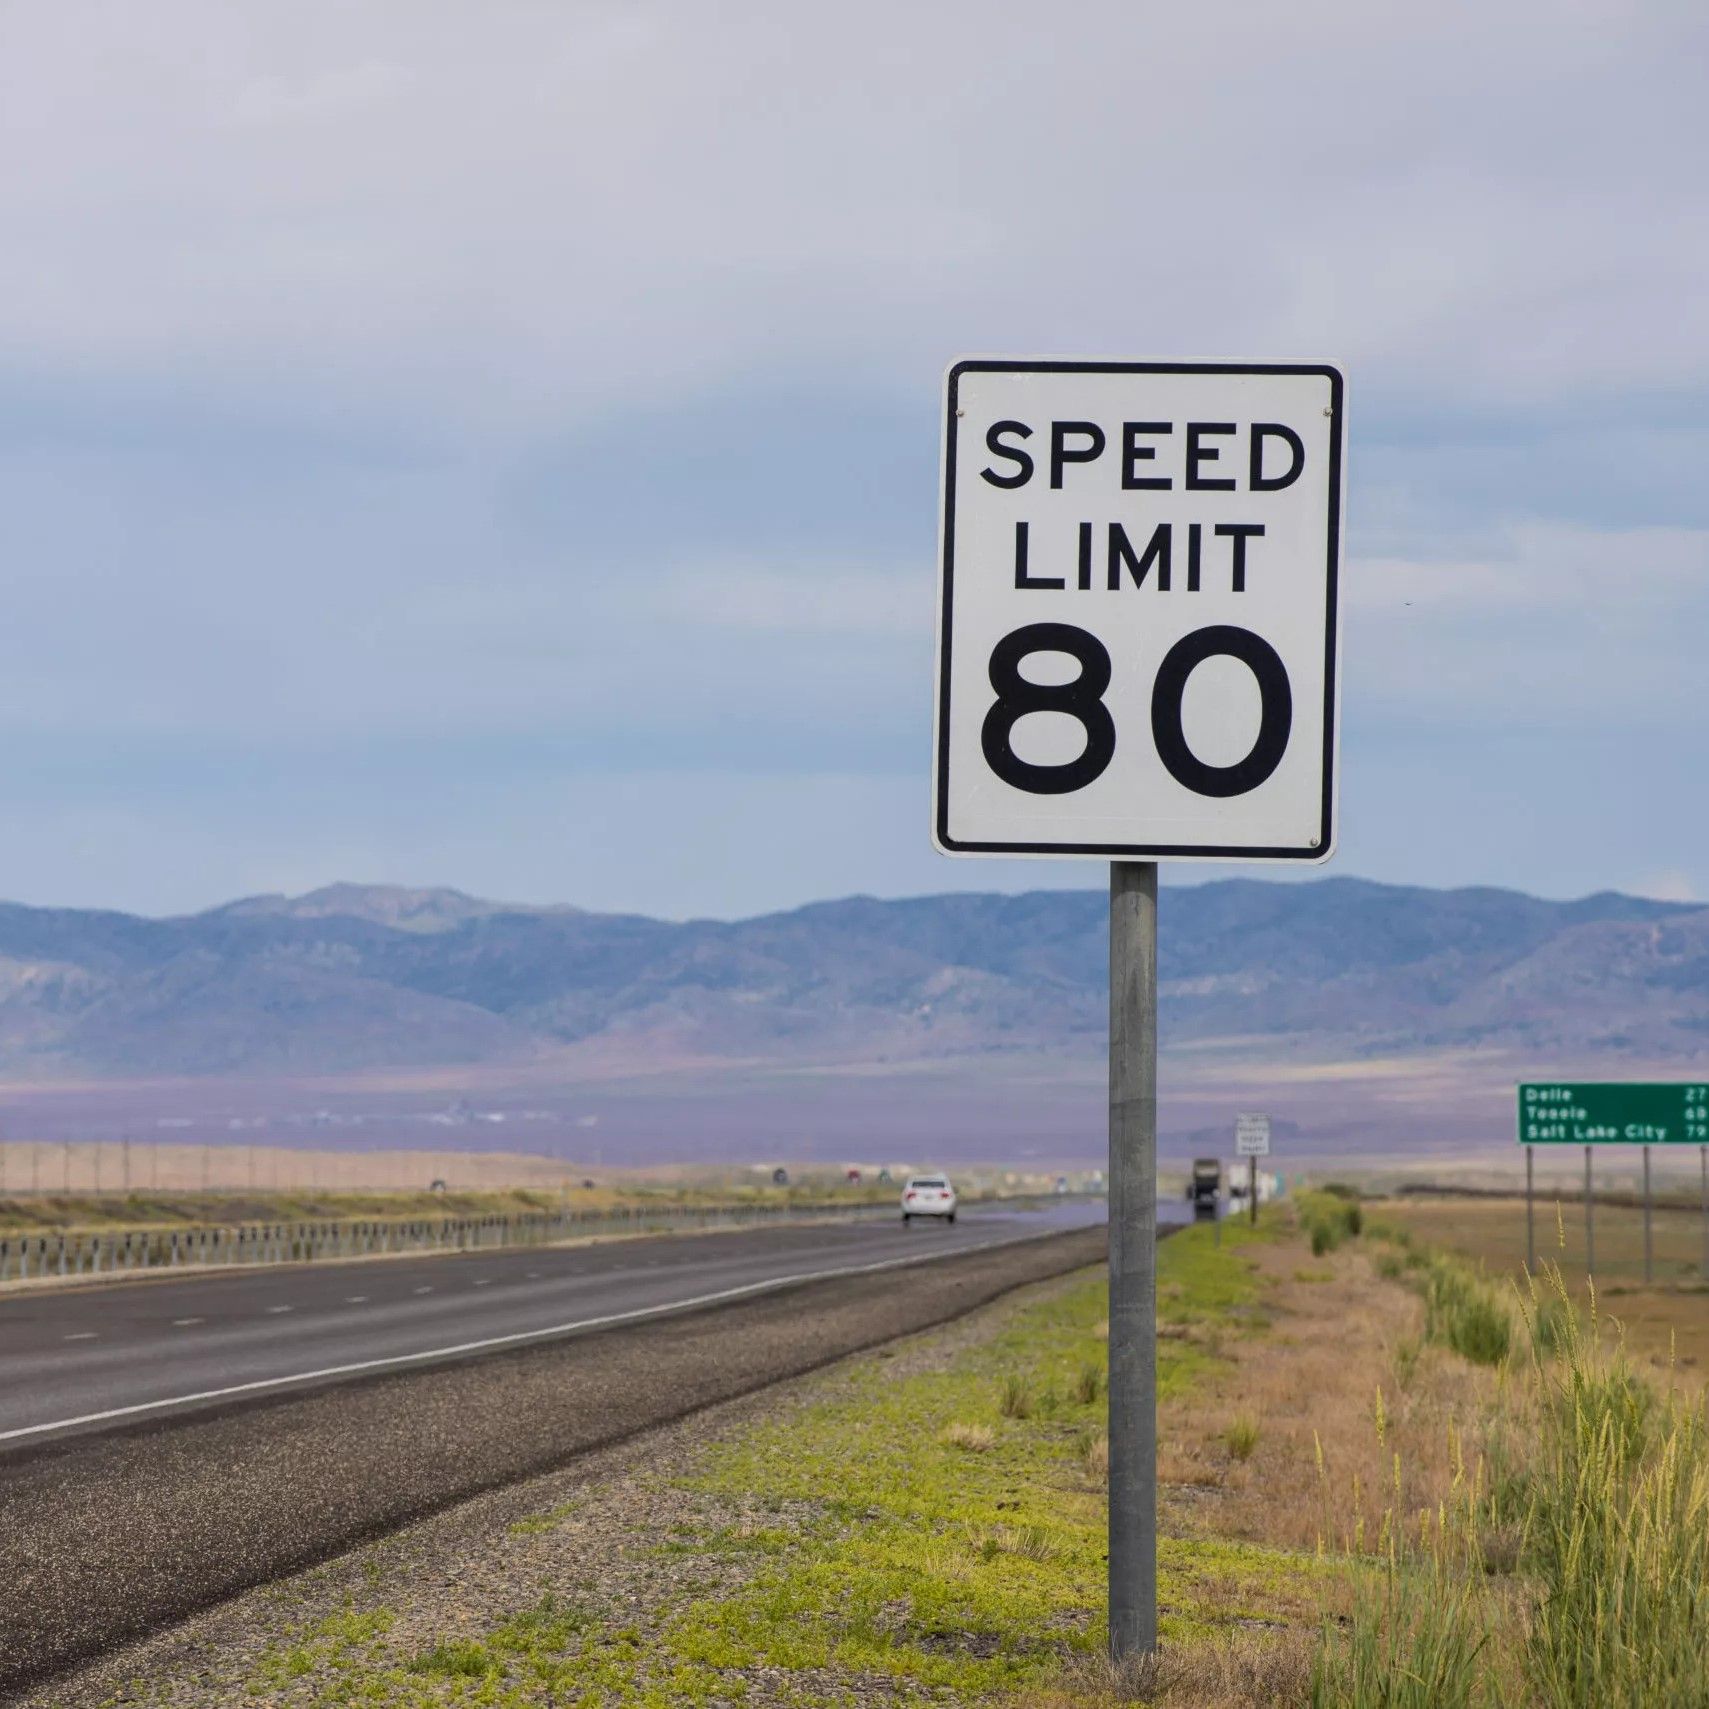 80mph speed limit sign alongside an open highway with mountains in the background